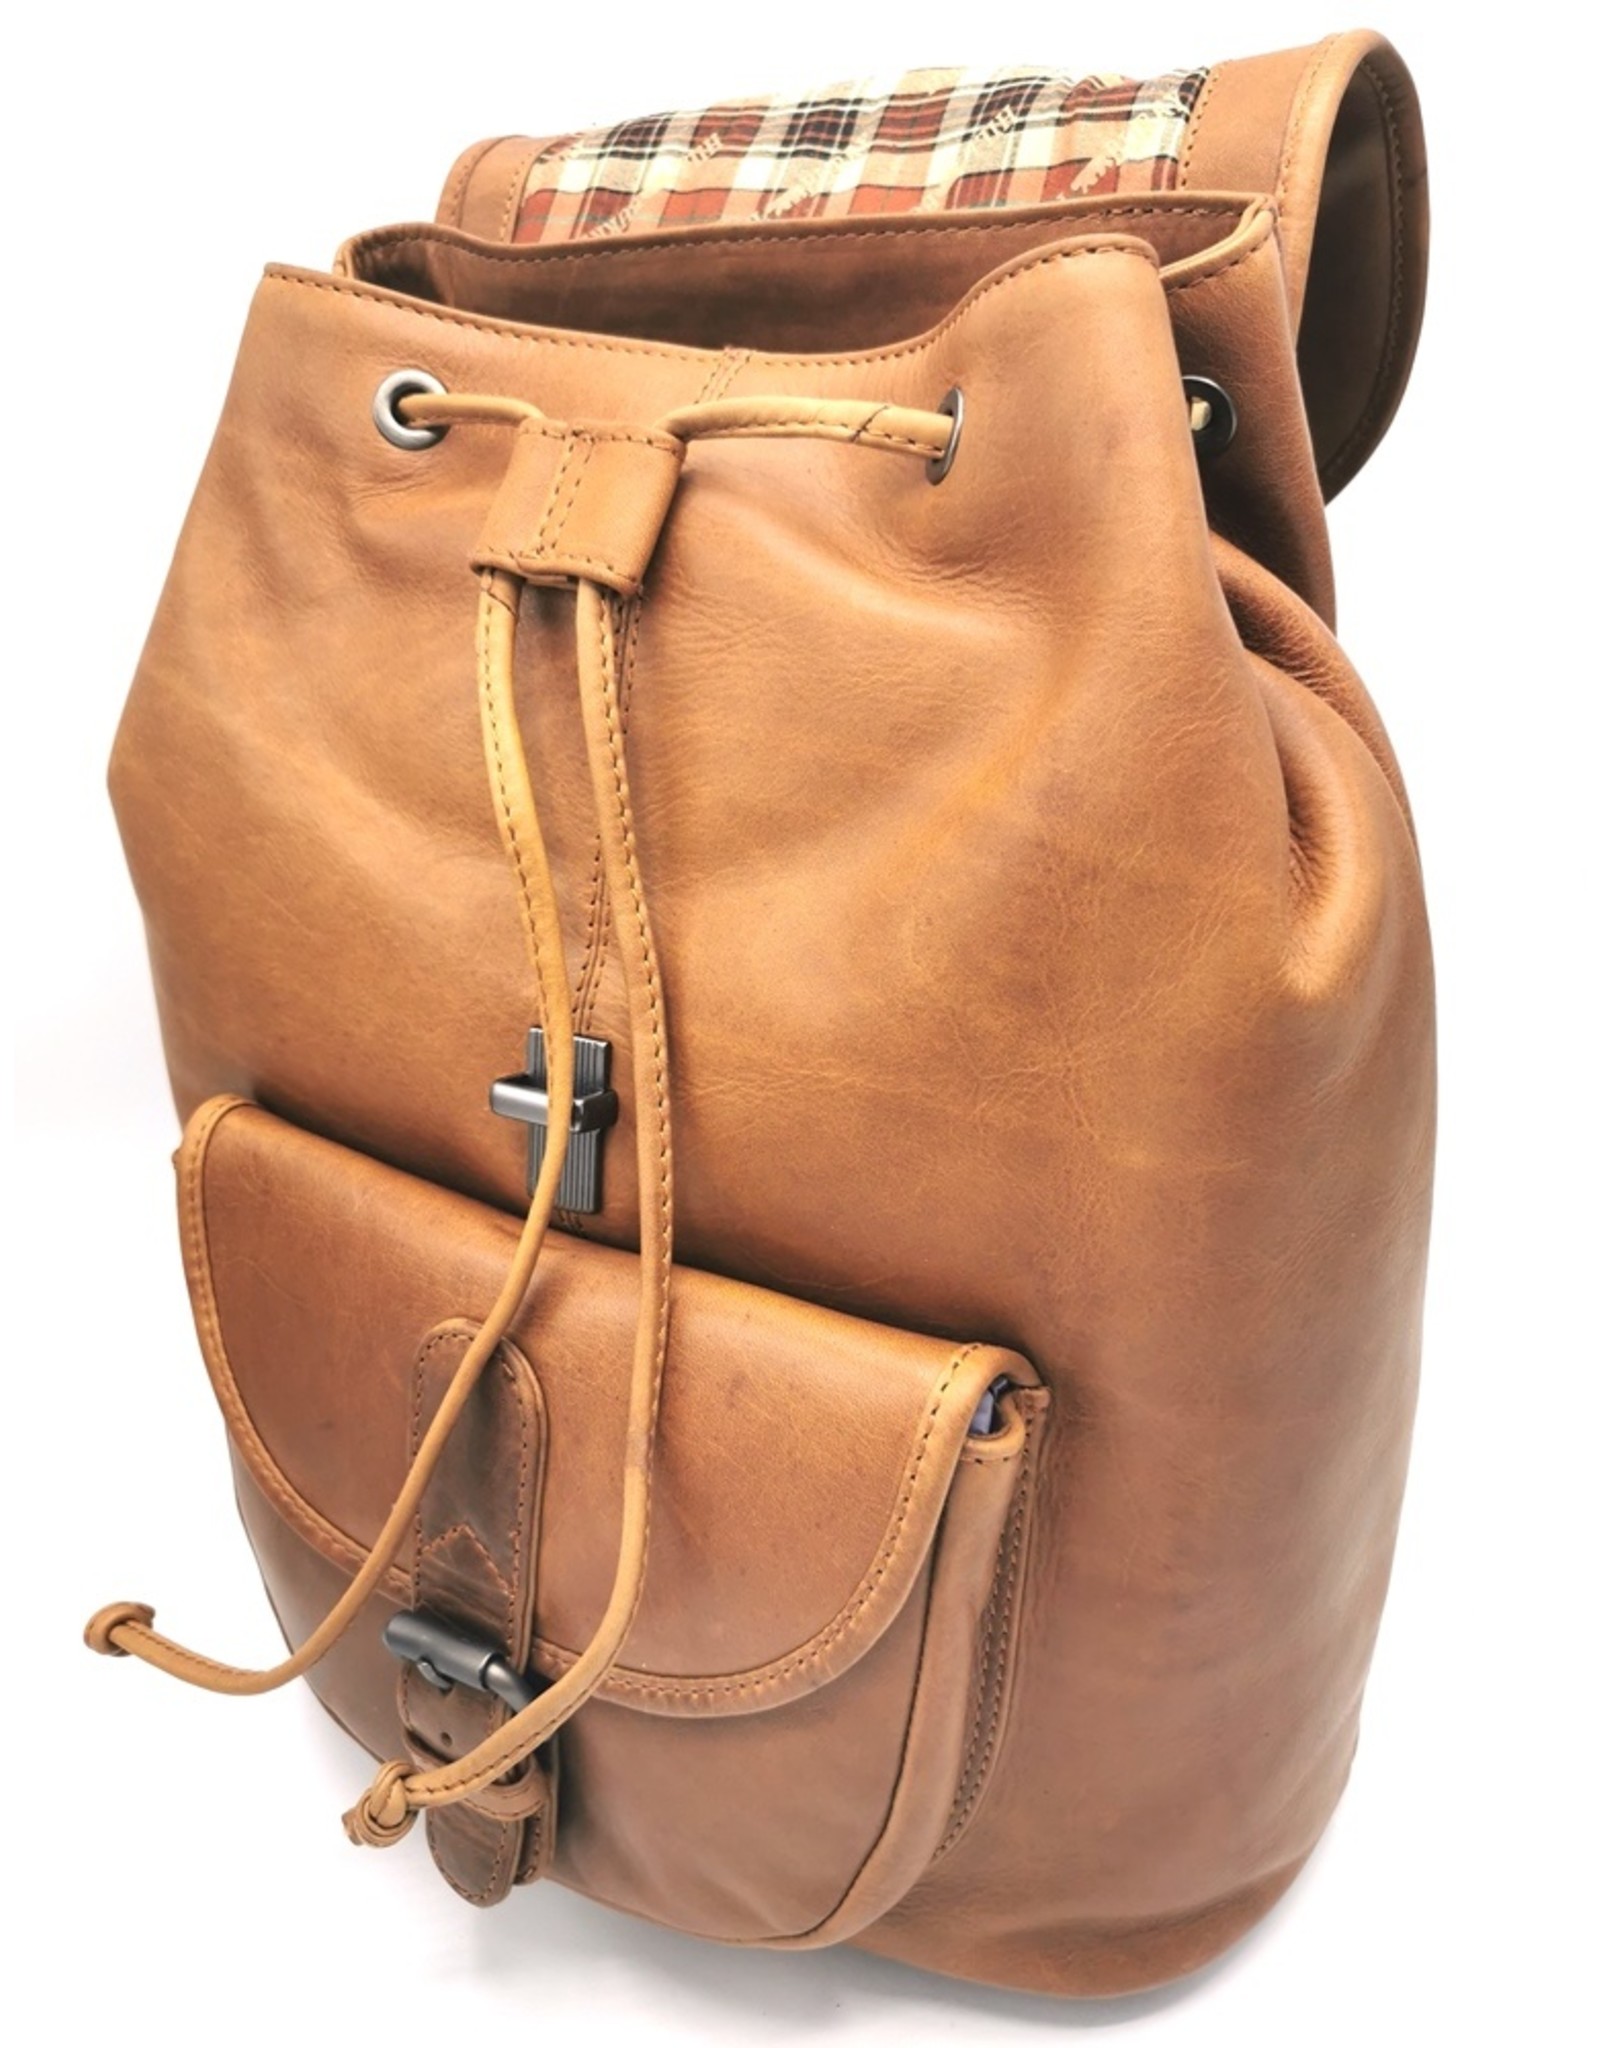 HillBurry Leather backpacks Leather shoppers - HillBurry Backpack with drawstring, flap and slide closure